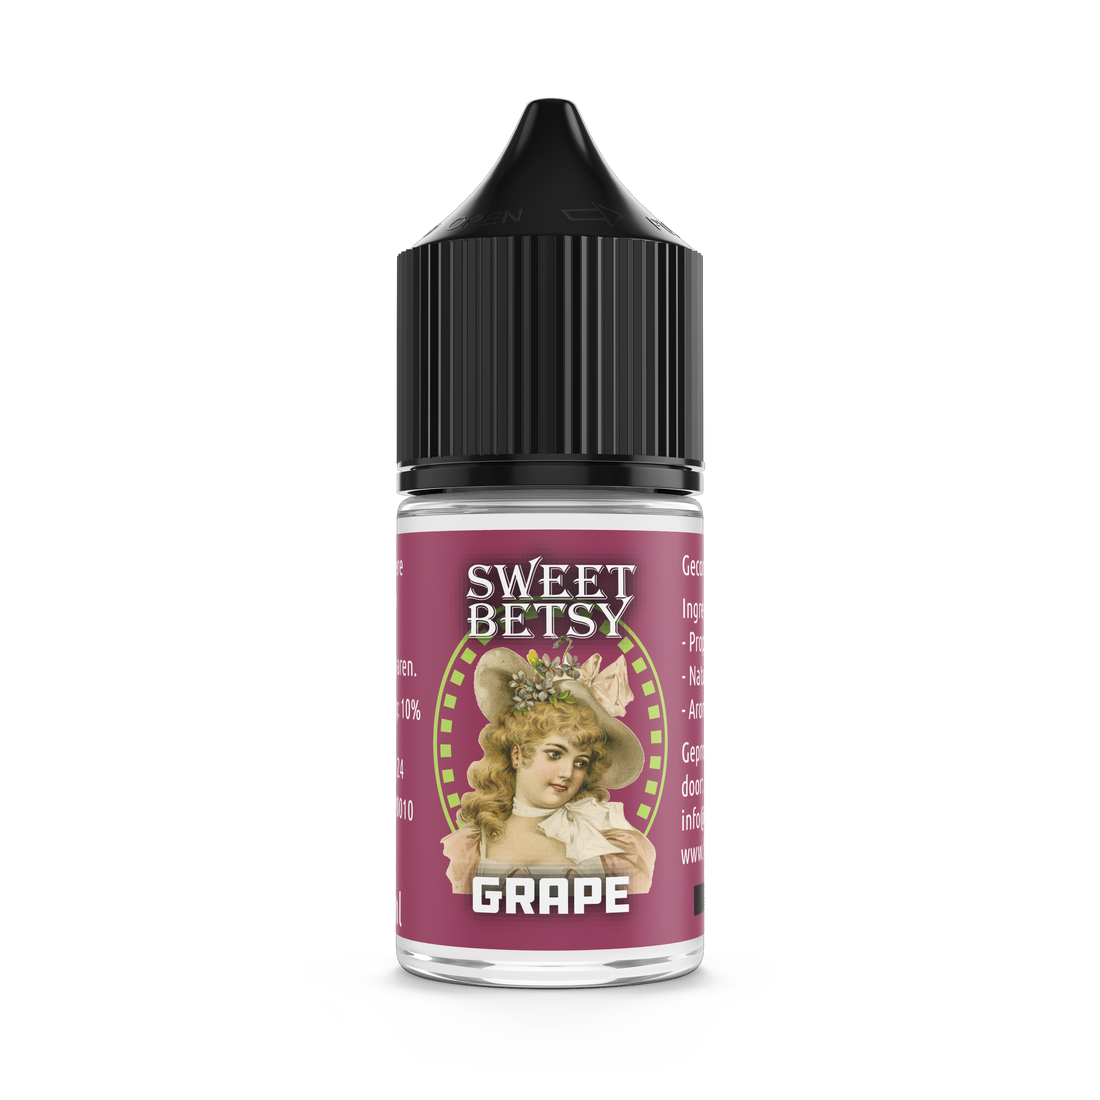 Sweet Betsy Druif aroma - Flavormonks